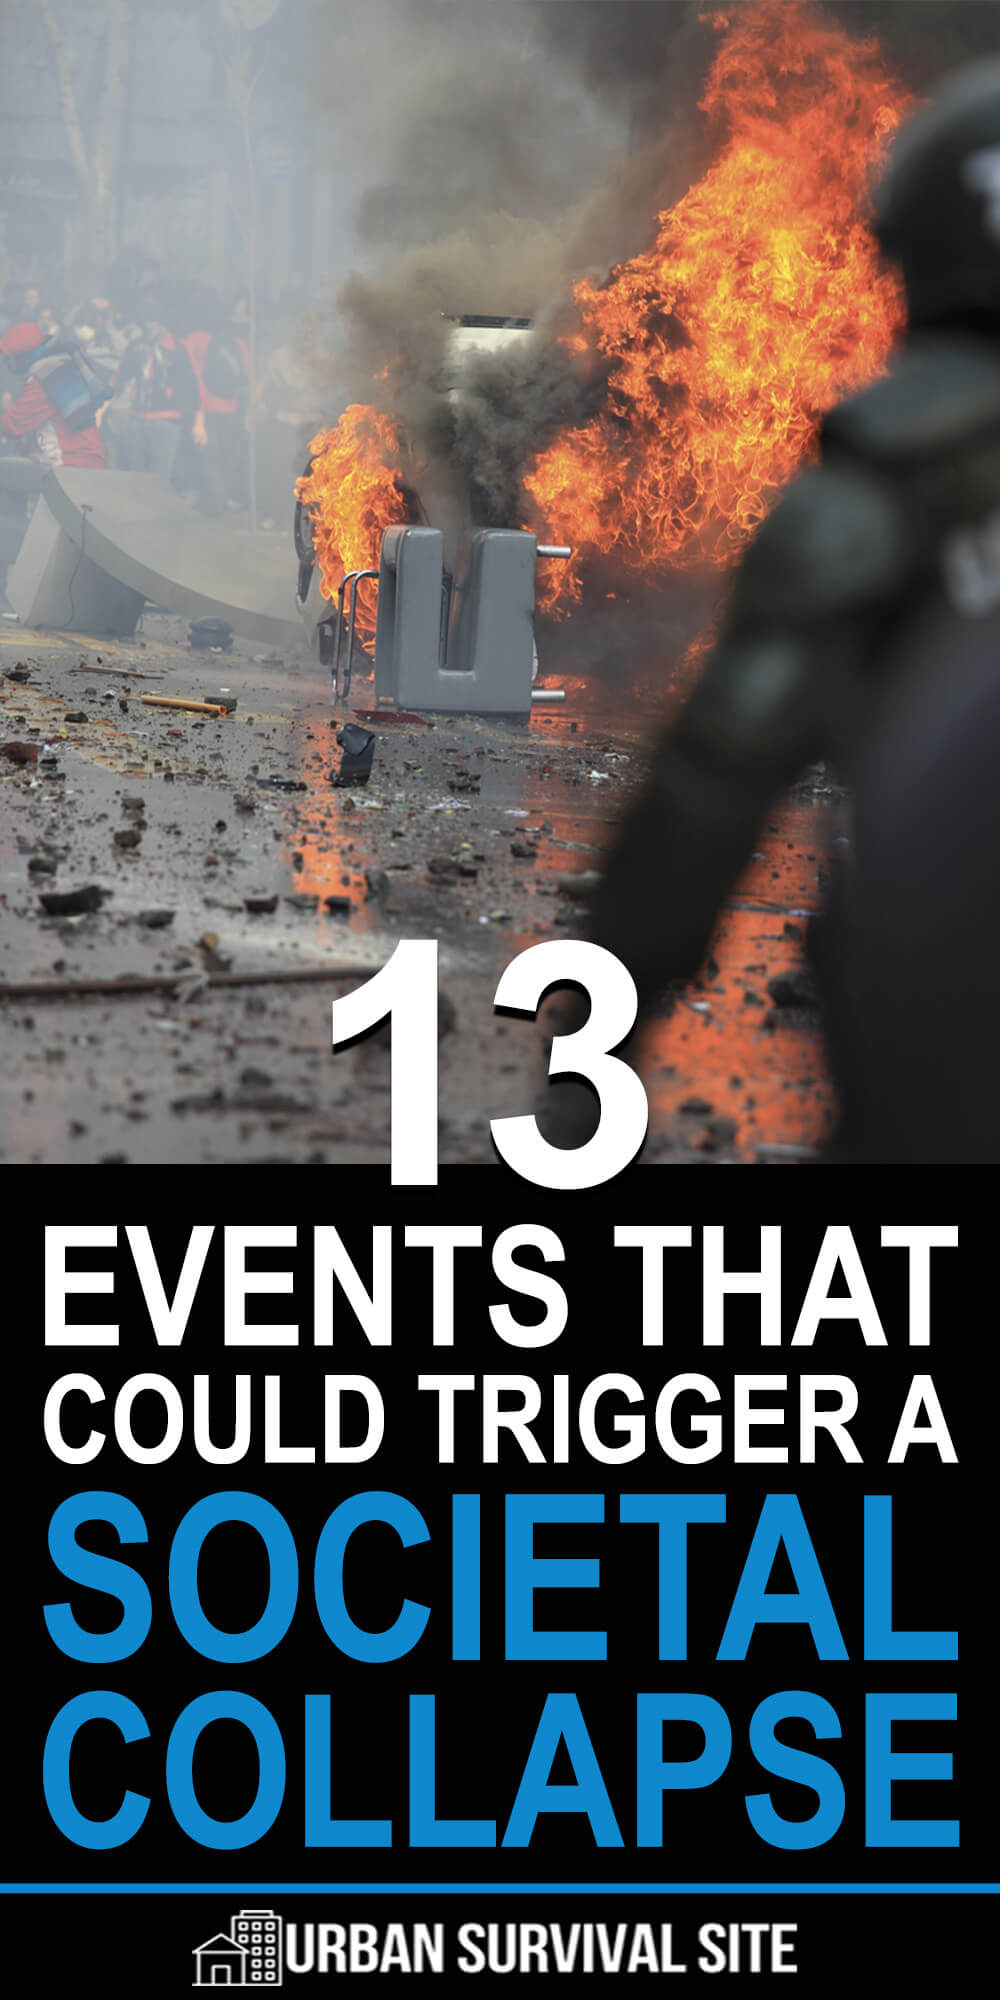 13 Events That Could Trigger A Societal Collapse